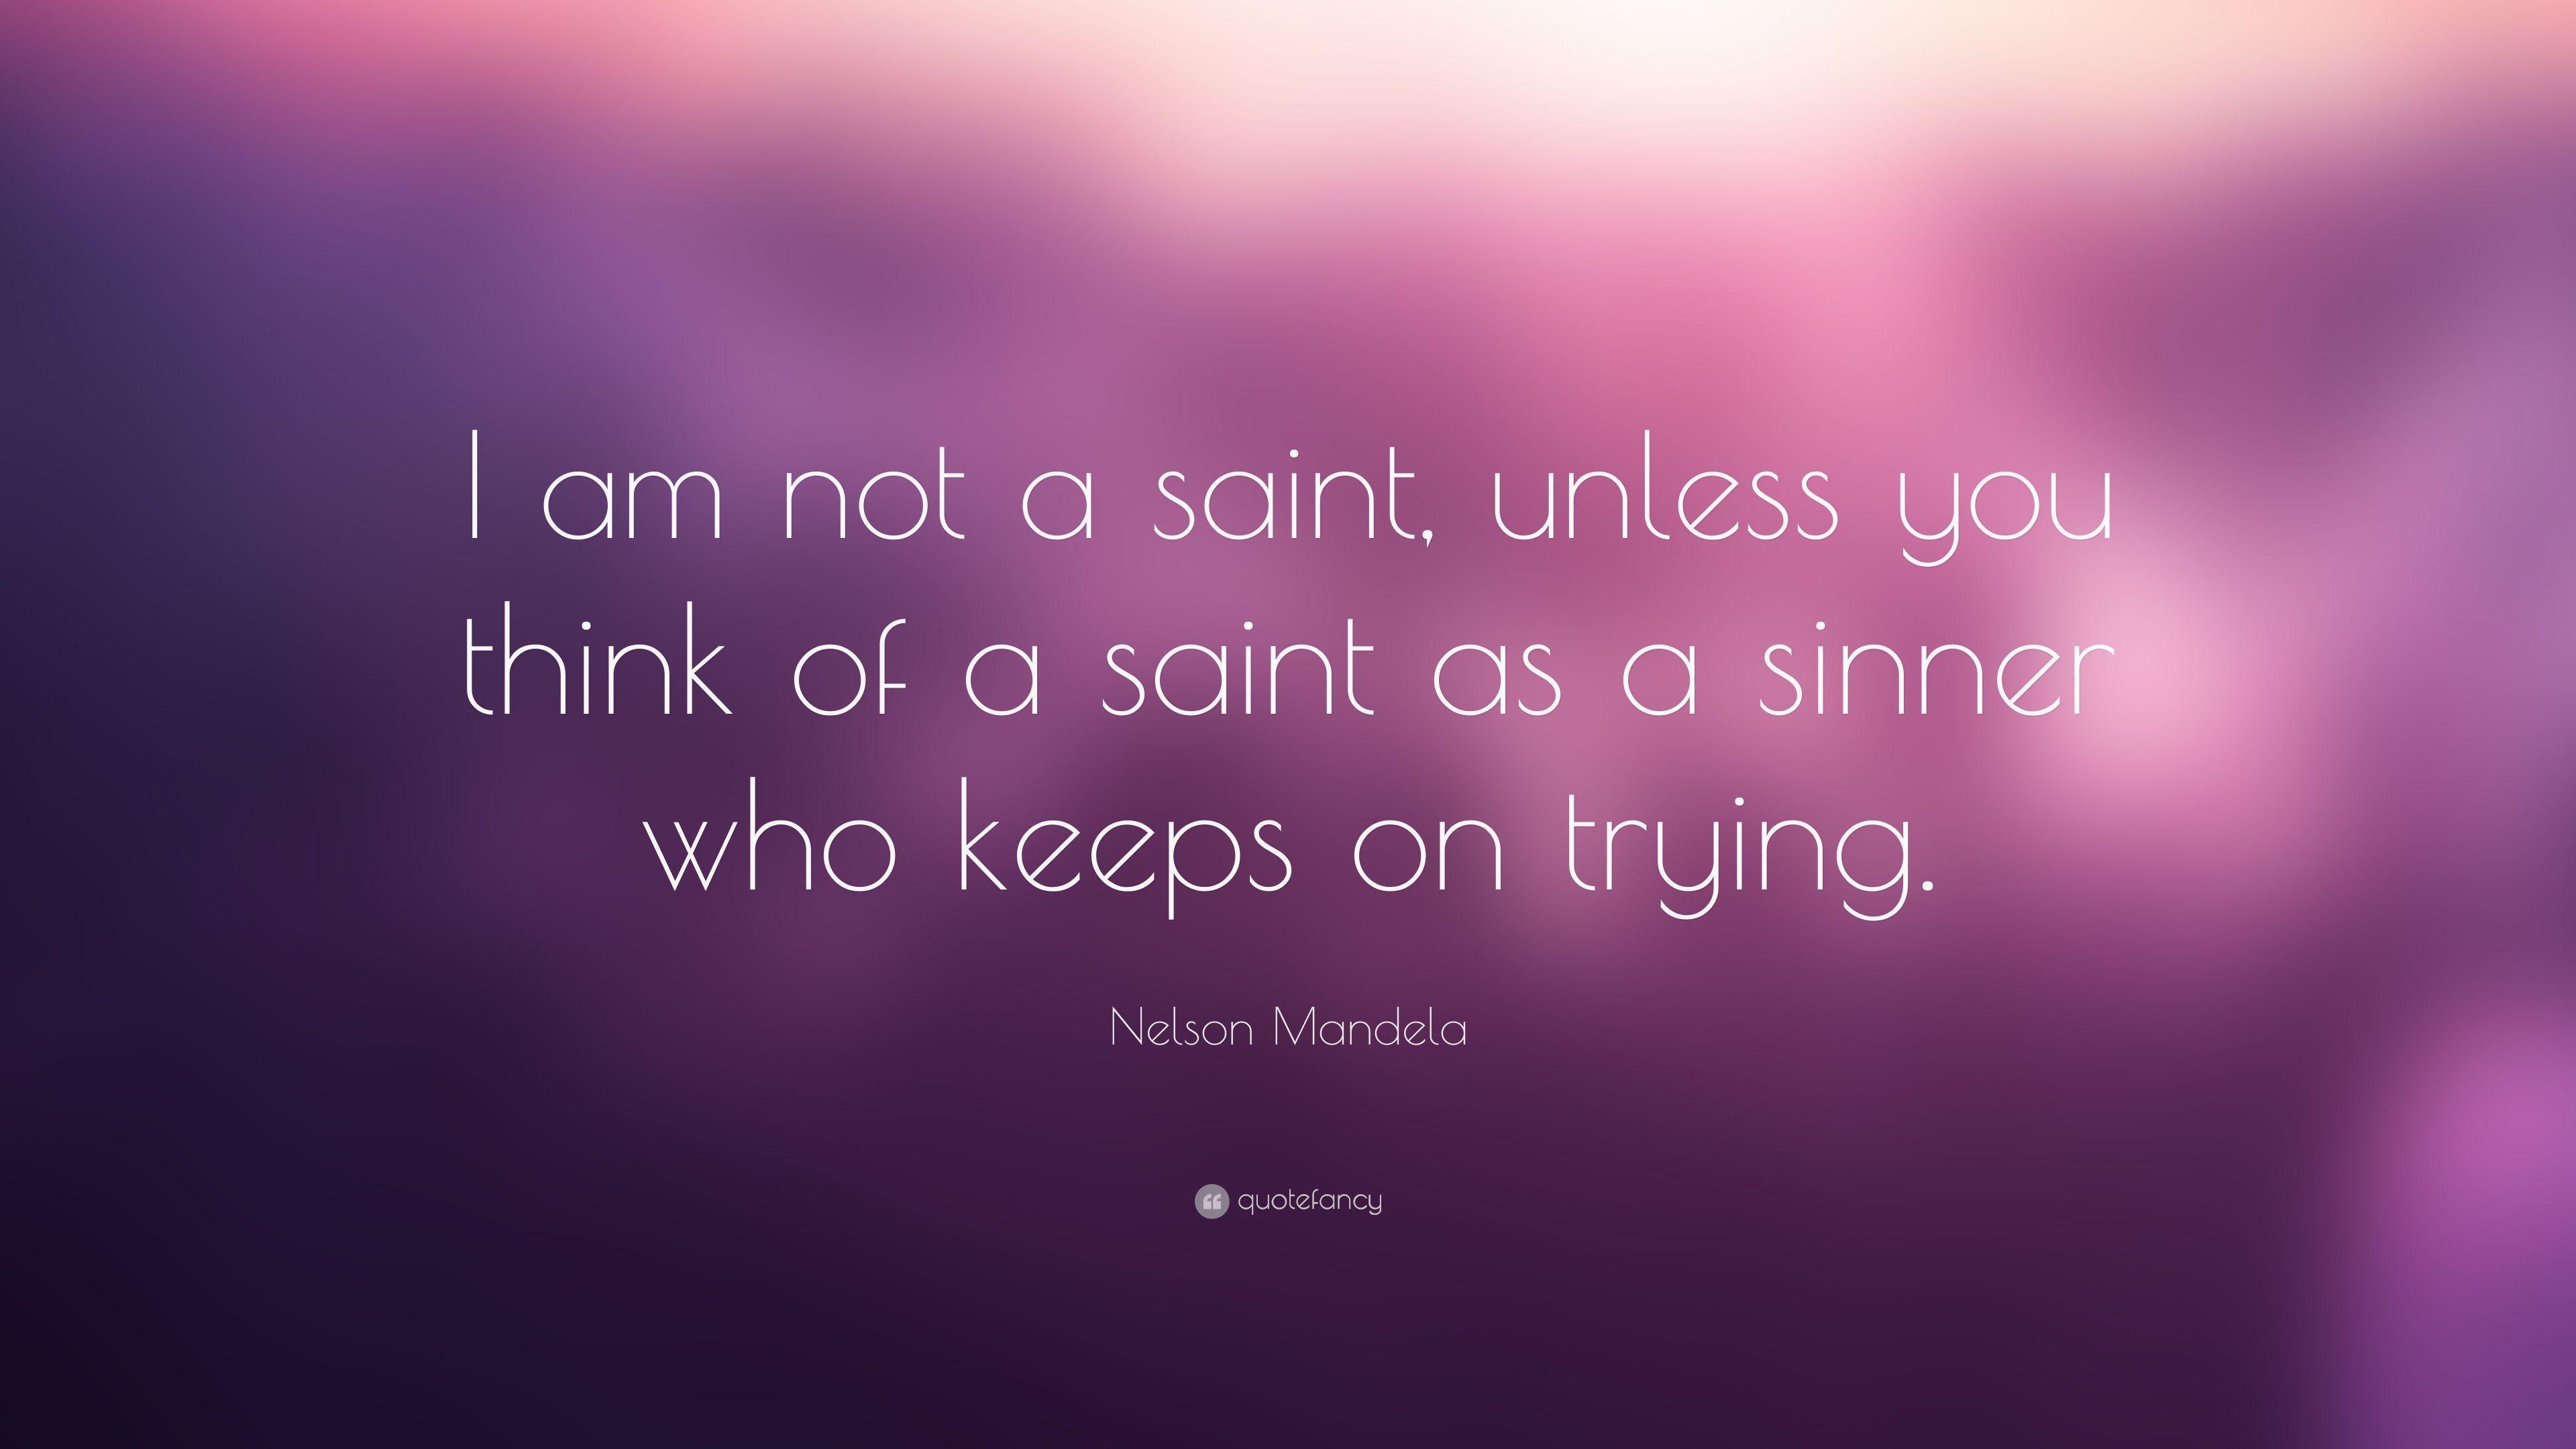 Nelson Mandela Quote: “I am not a saint, unless you think of a